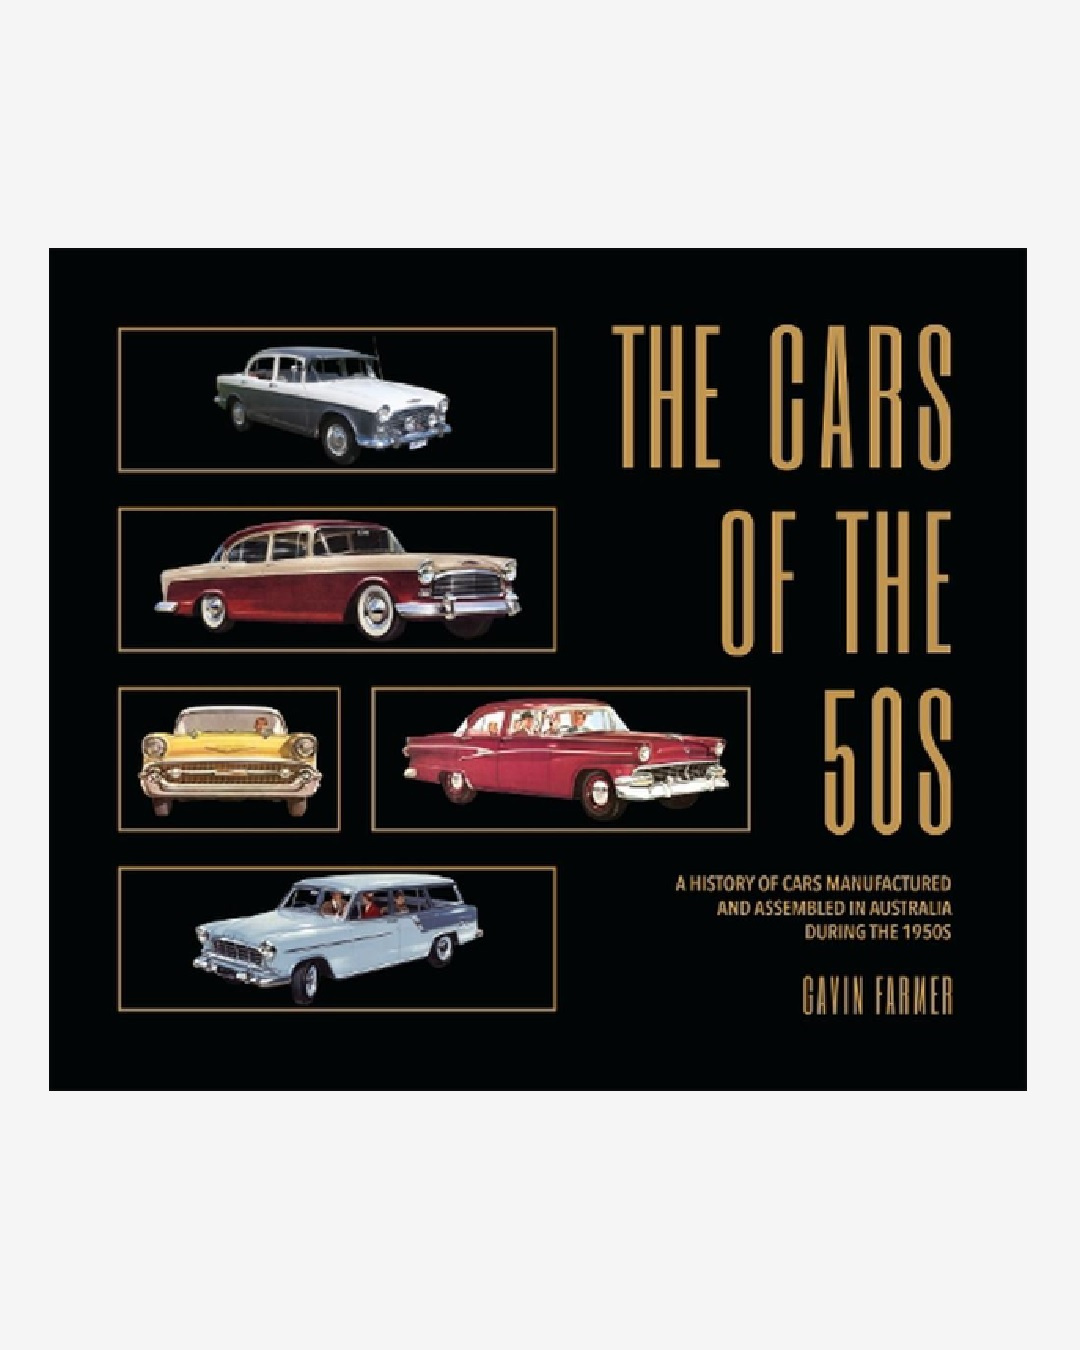 The cars of the 50s book